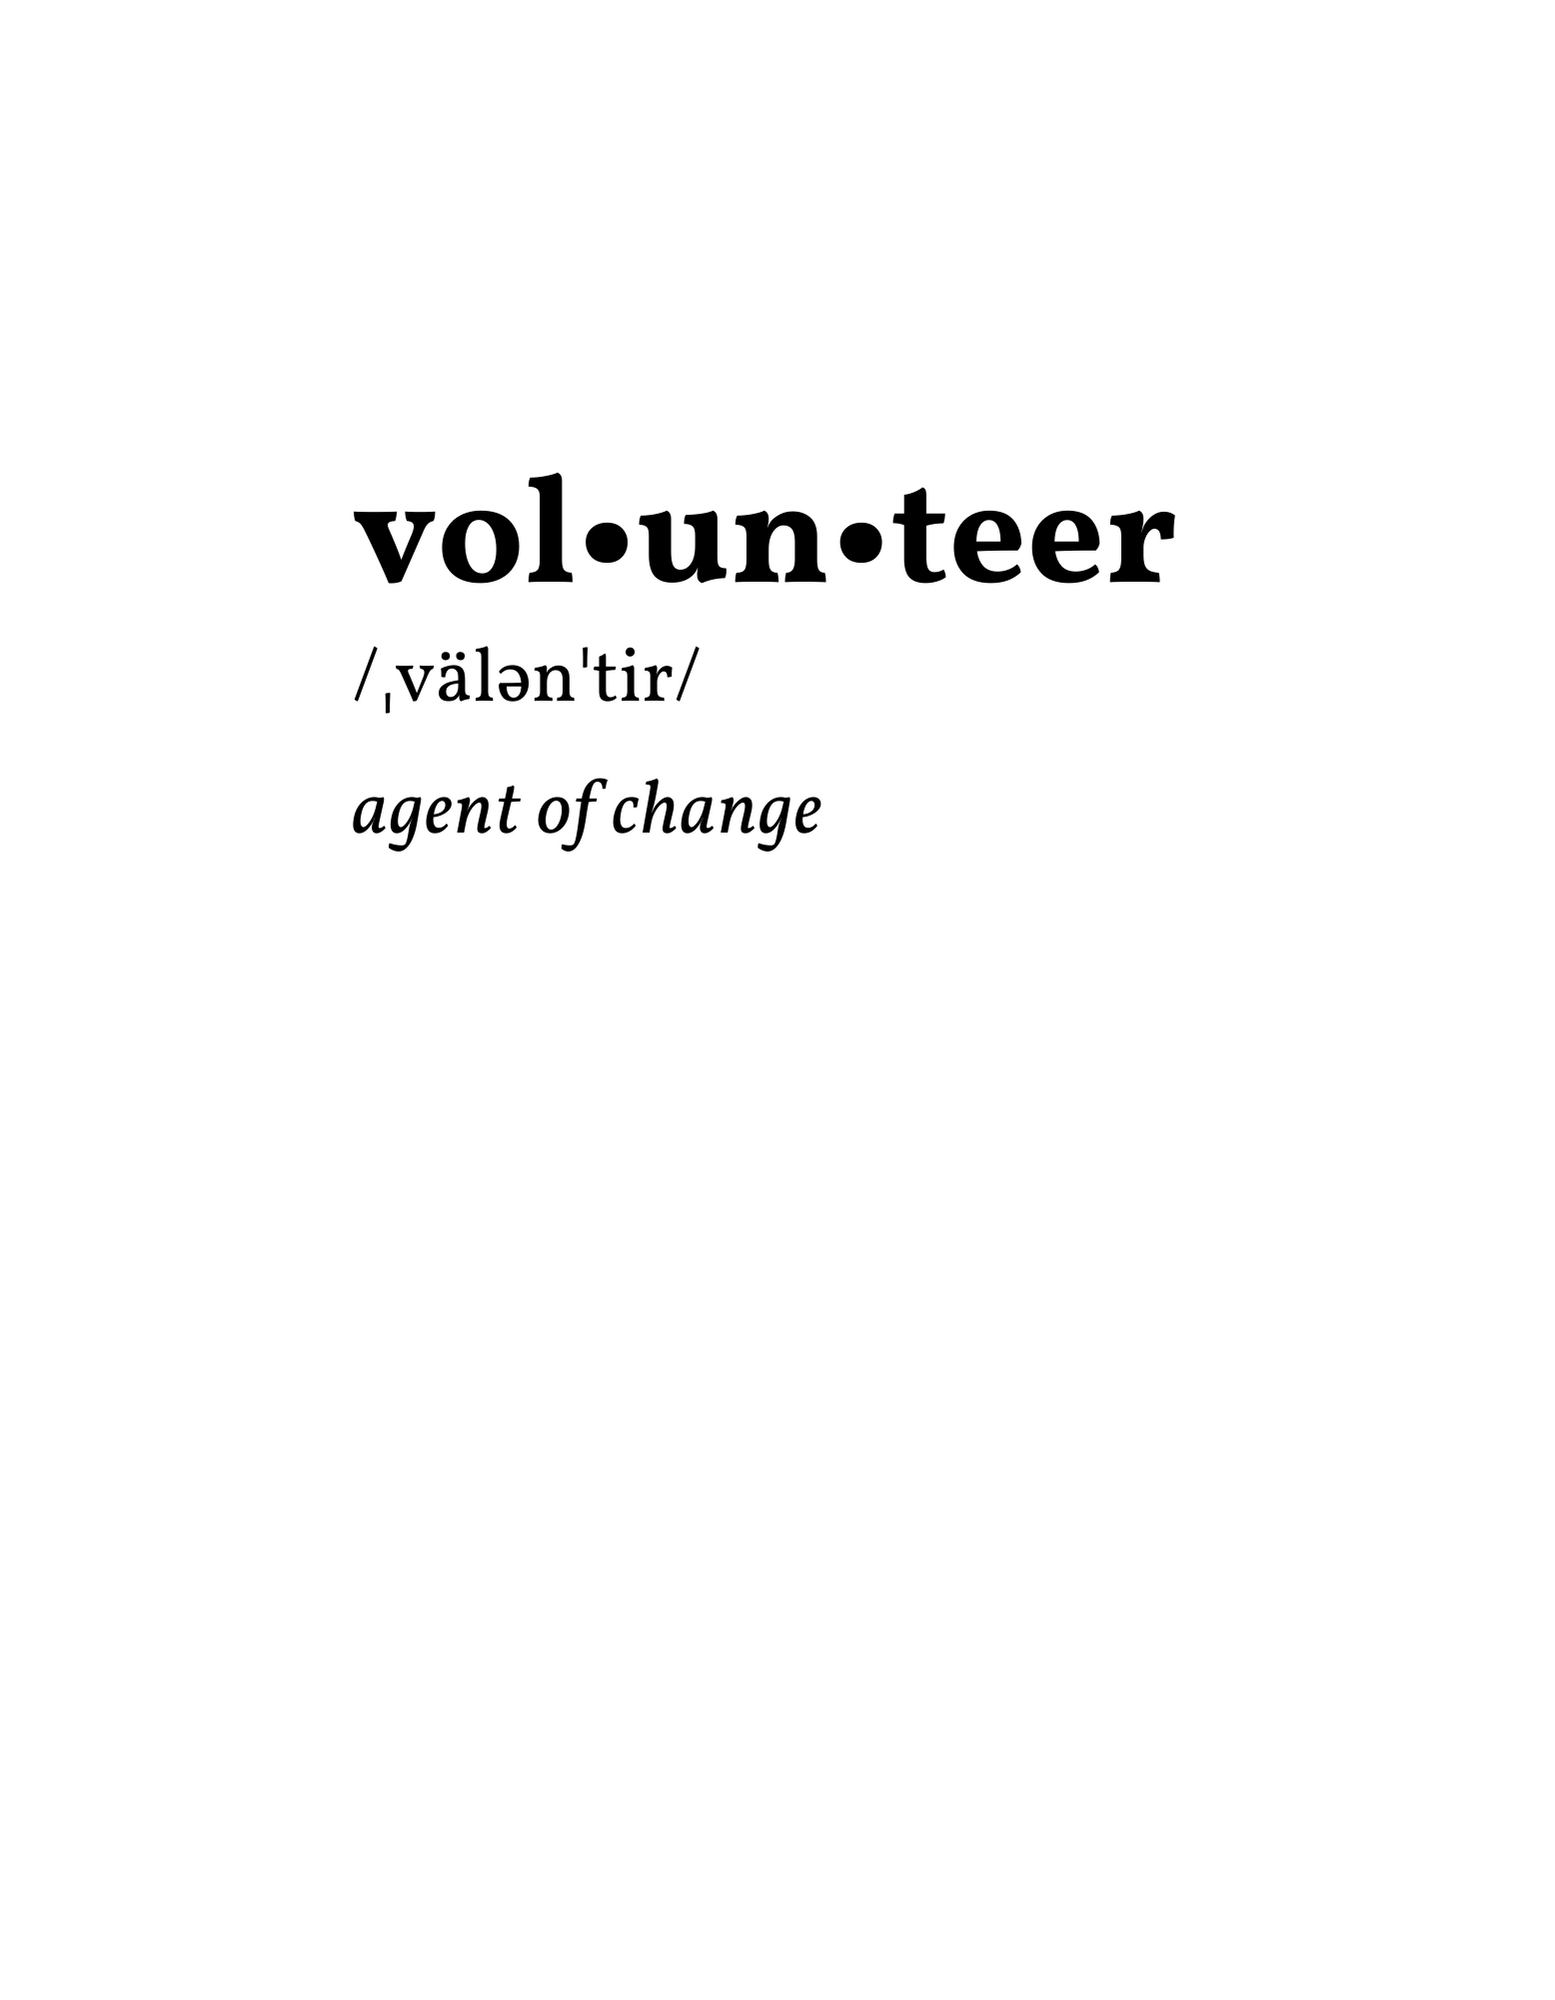 Volunteers are the most crucial component of RYALT.